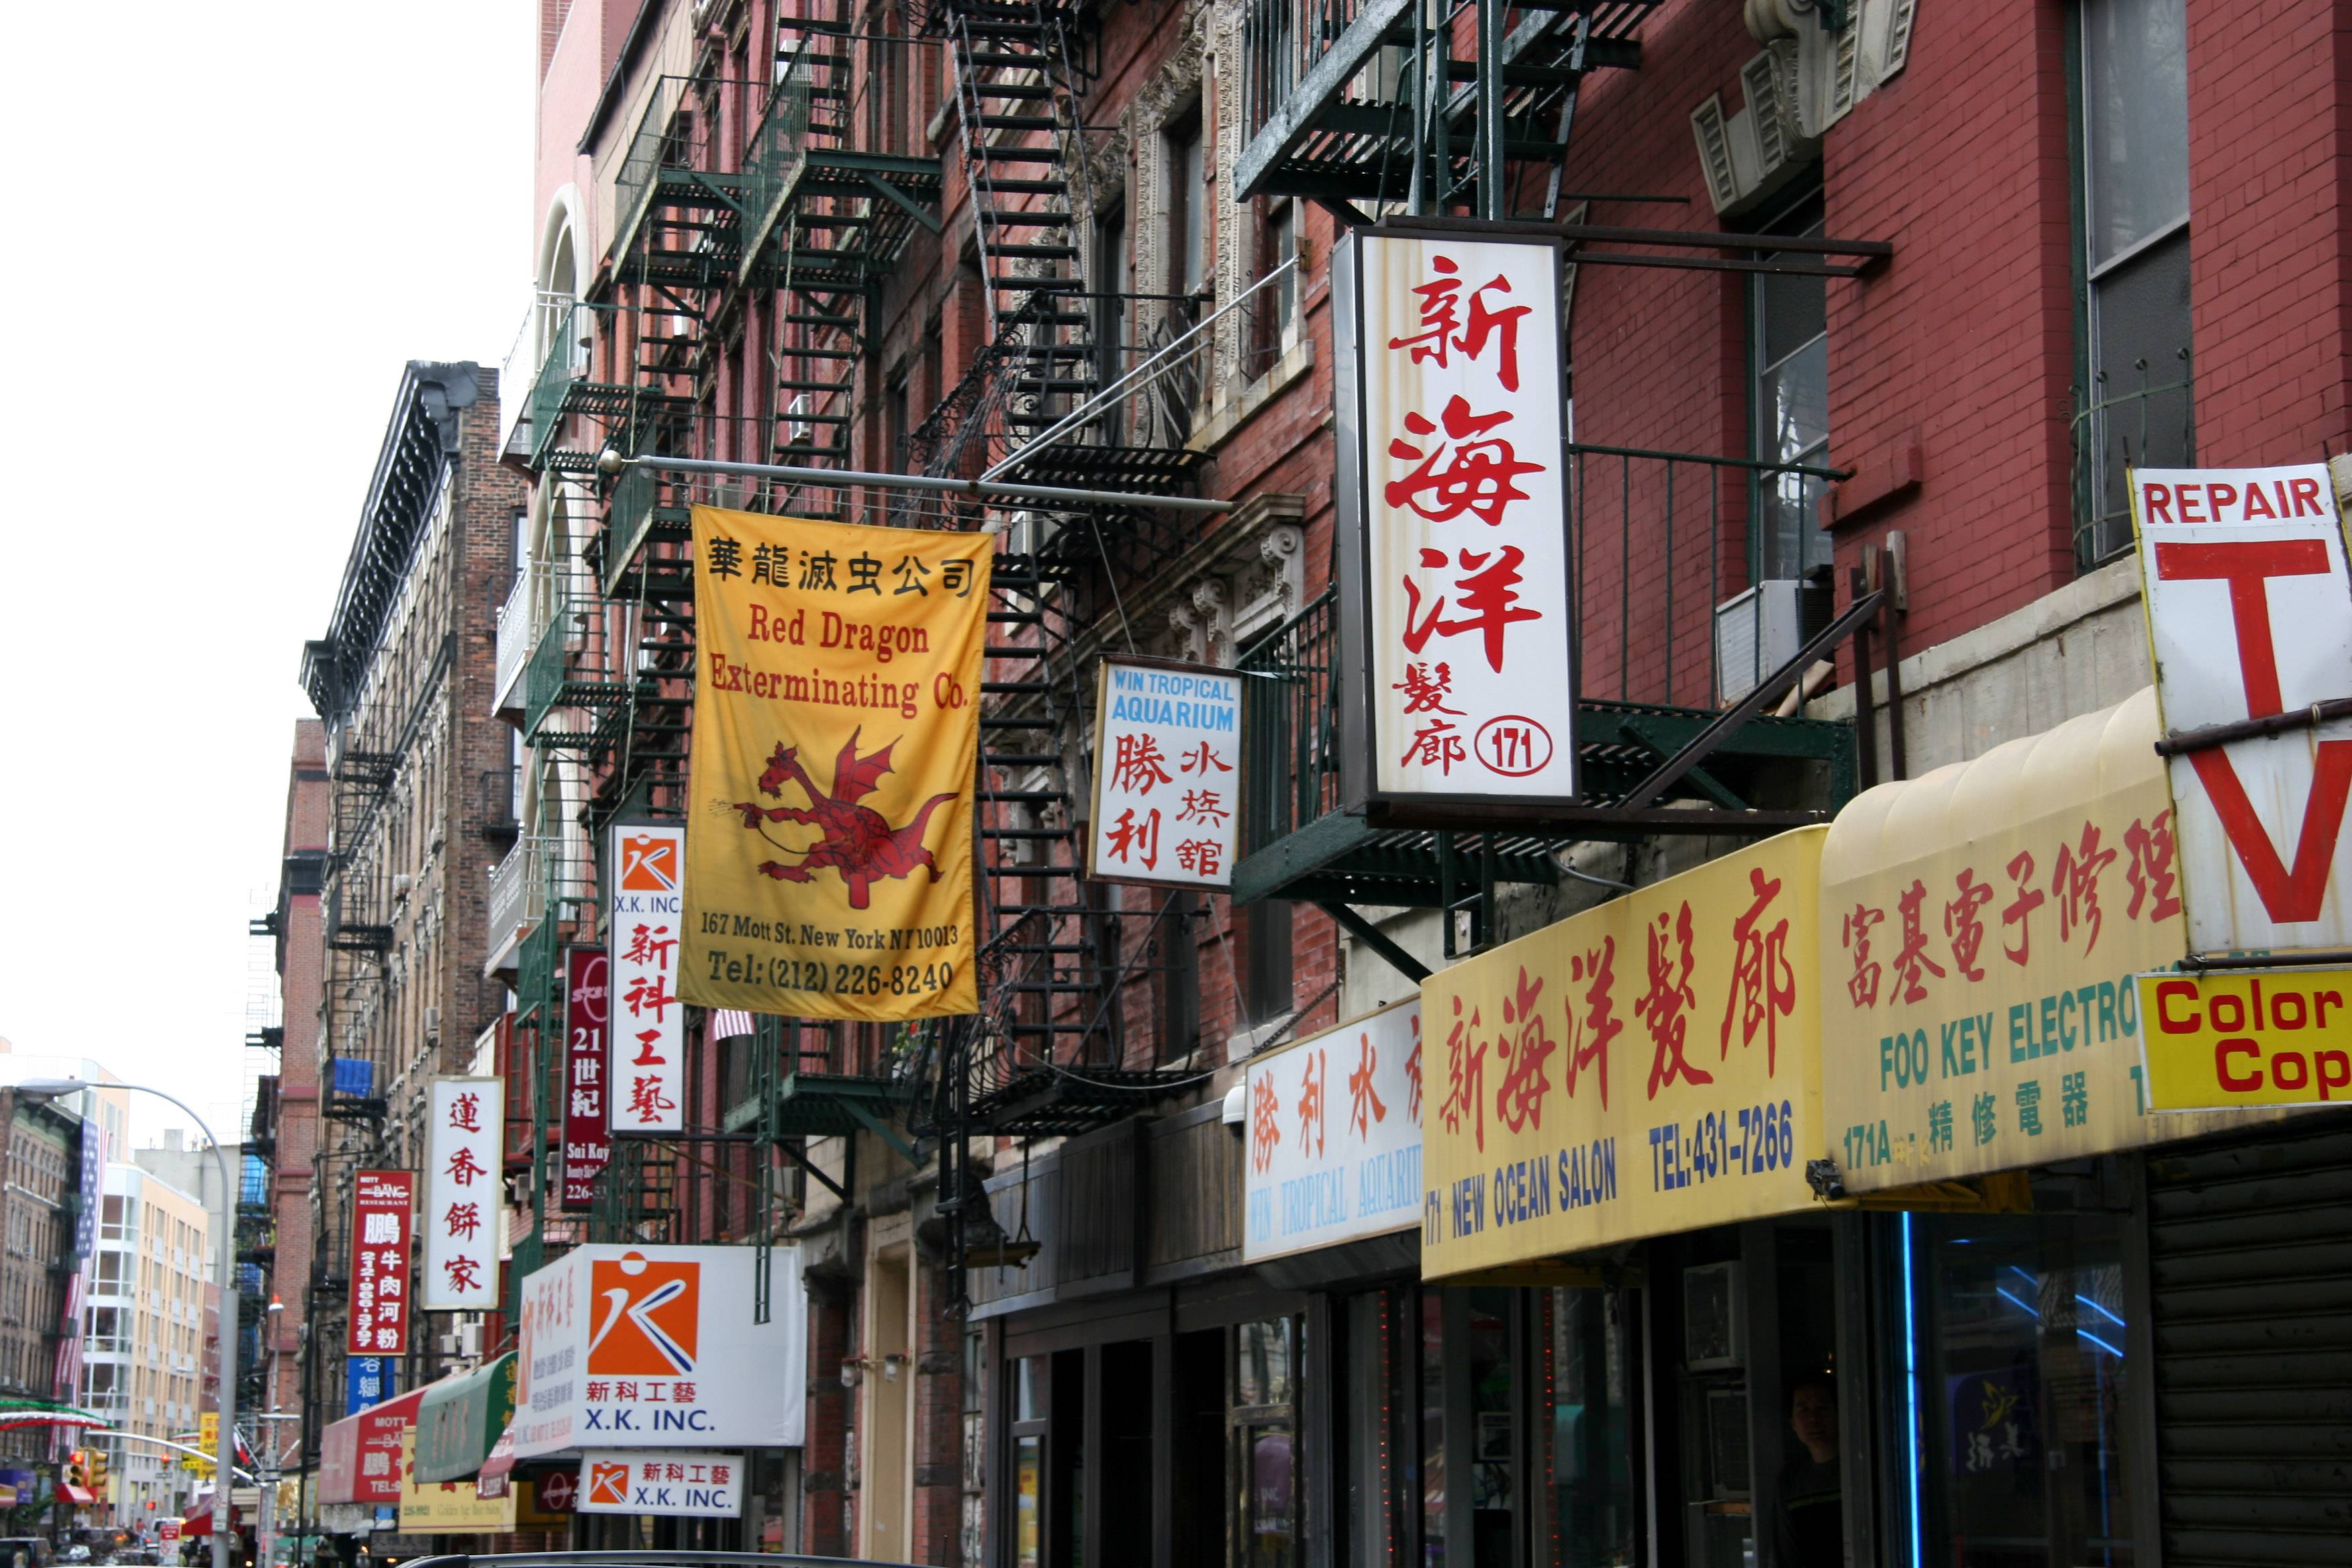 Chinese Signs below Broome Street